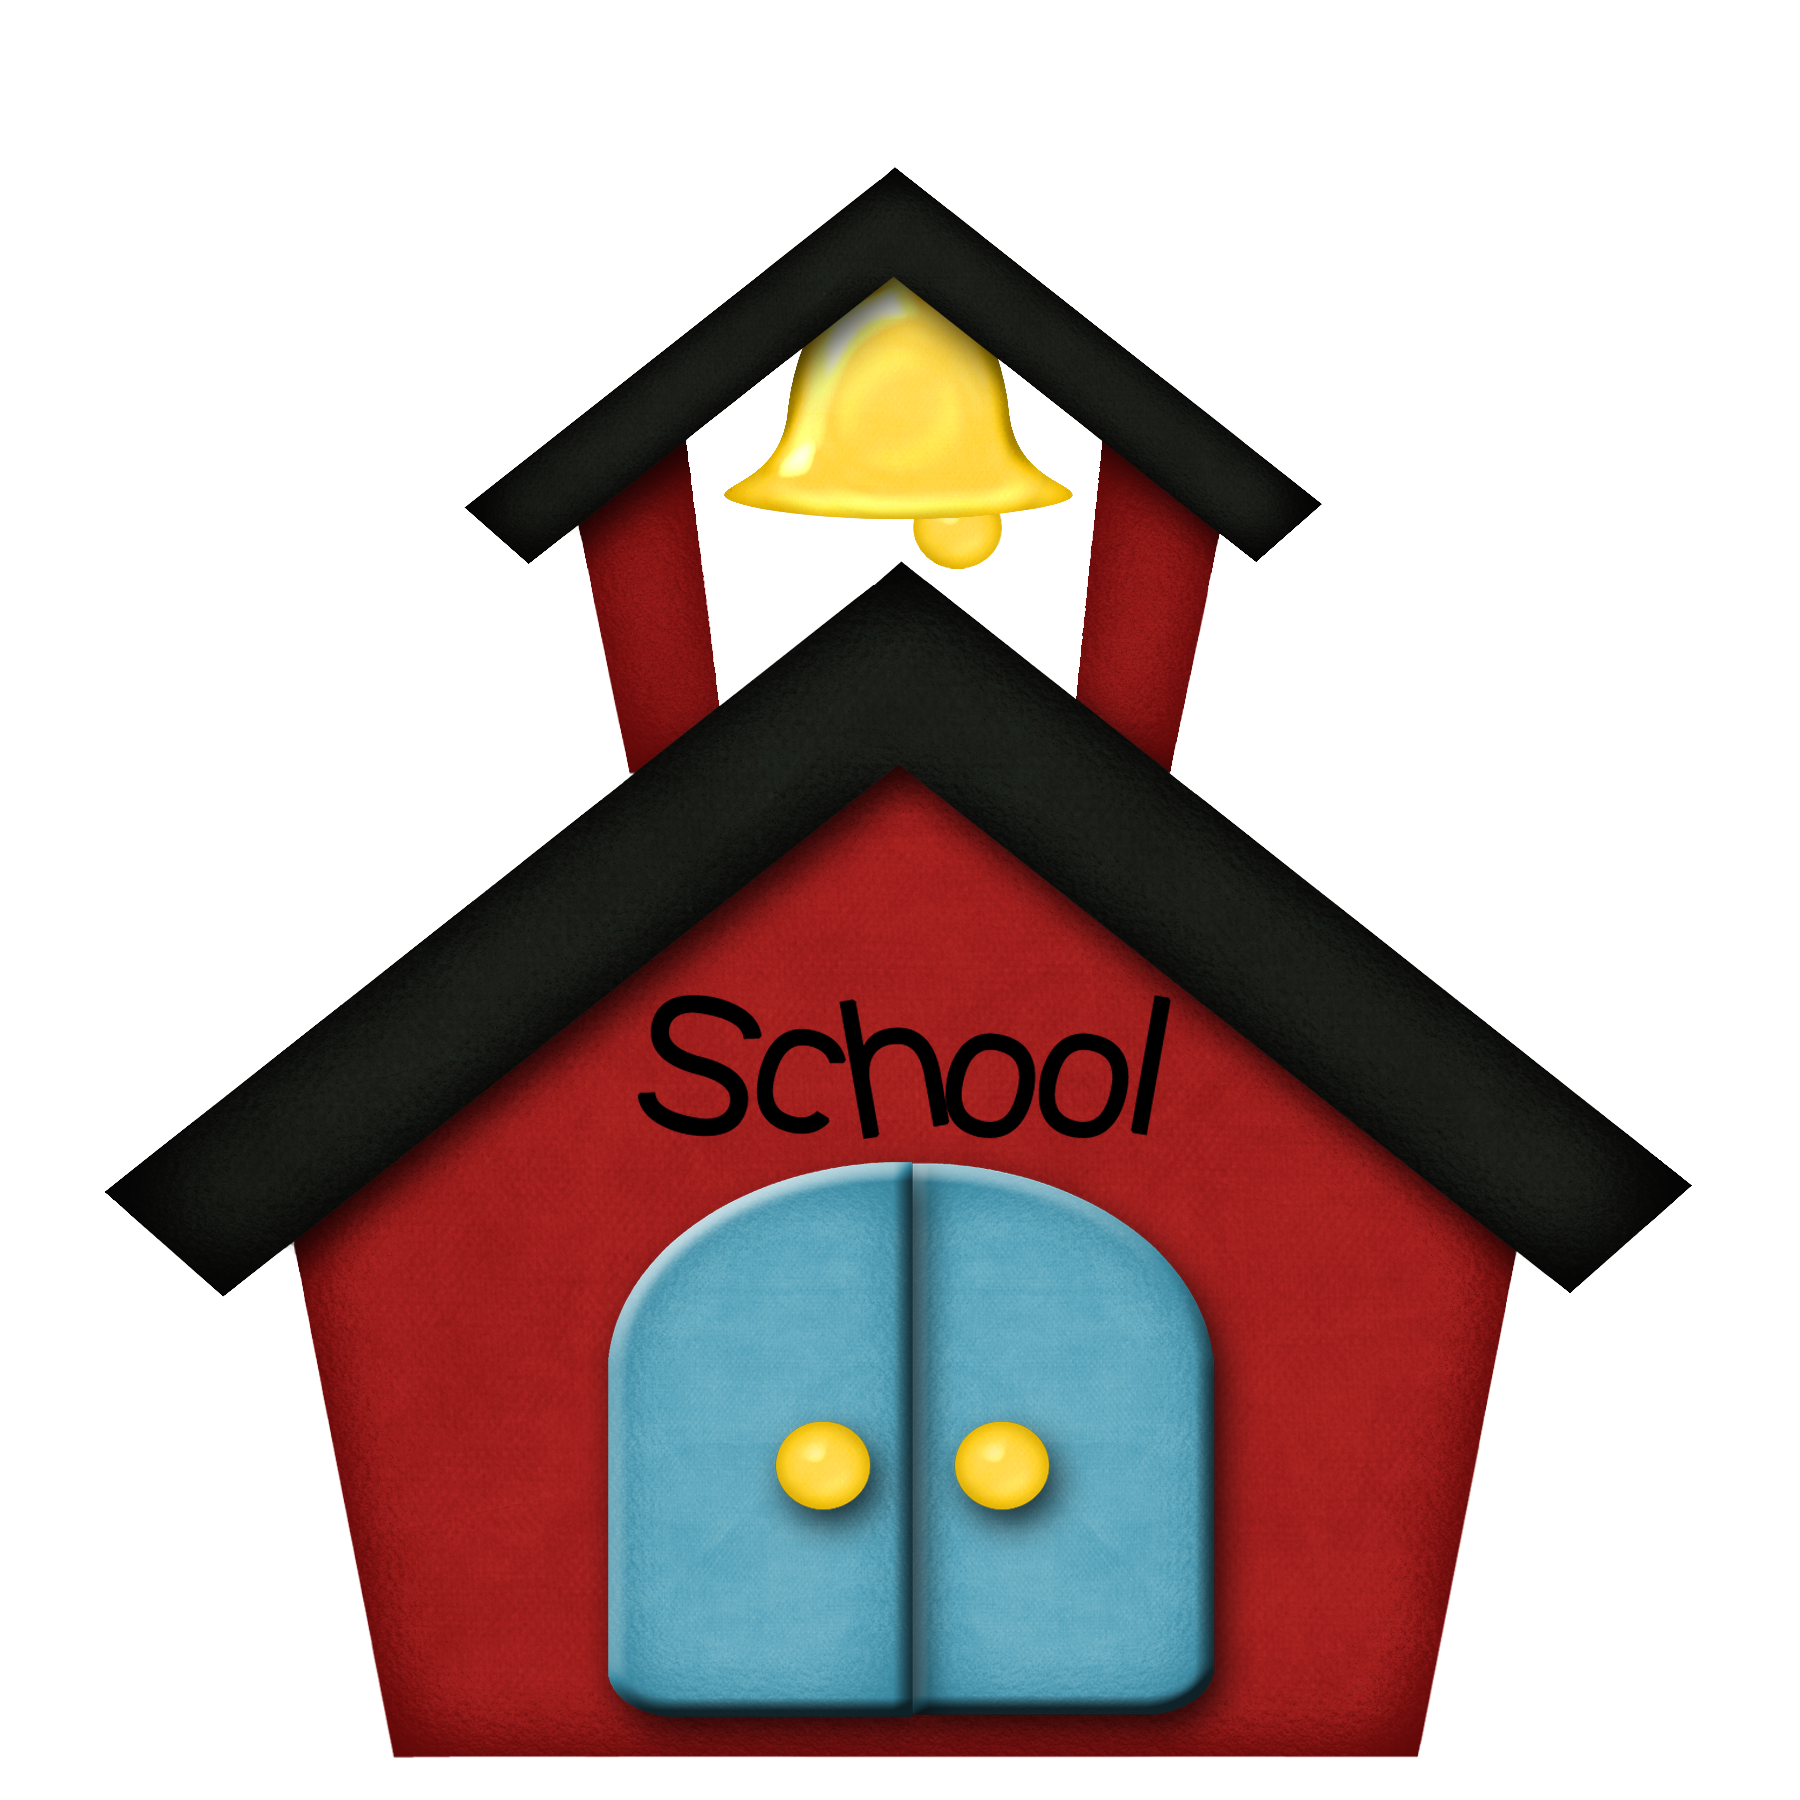 38 School House Photos Free Cliparts That You Can Download To You